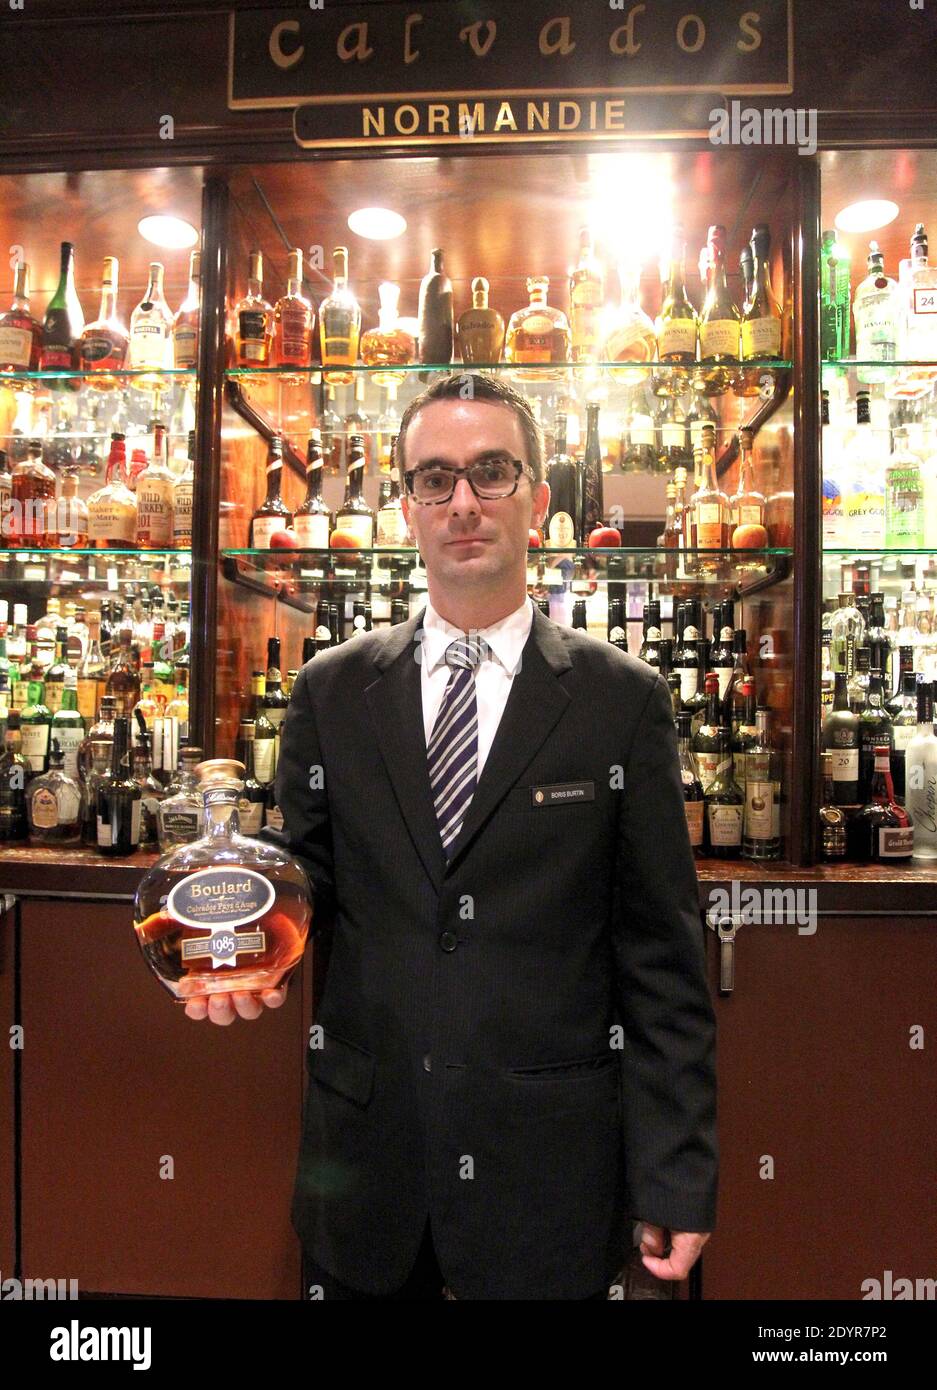 Boris Burtin, Restaurant and Bar manager with Jose Torrella Jr, Mixologist at the Barclay Bar at the Intercontinental in New York City, discusse the 30 types of the French apple brandy Calvados that the bar houses on July 5, 2013. Honored as the 'First Calvados Bar' in the US, the bar's menu offers a cocktail featuring calvados and apple juice from New York apples, 'flights' featuring four one-ounce tastings, and a 1939 vintage 'Apellation Calvados', priced at $198. A twice-distilled brandy from Normandy, Calvados blends over two dozen types of apples creating its distinct flavor and aroma. Ph Stock Photo